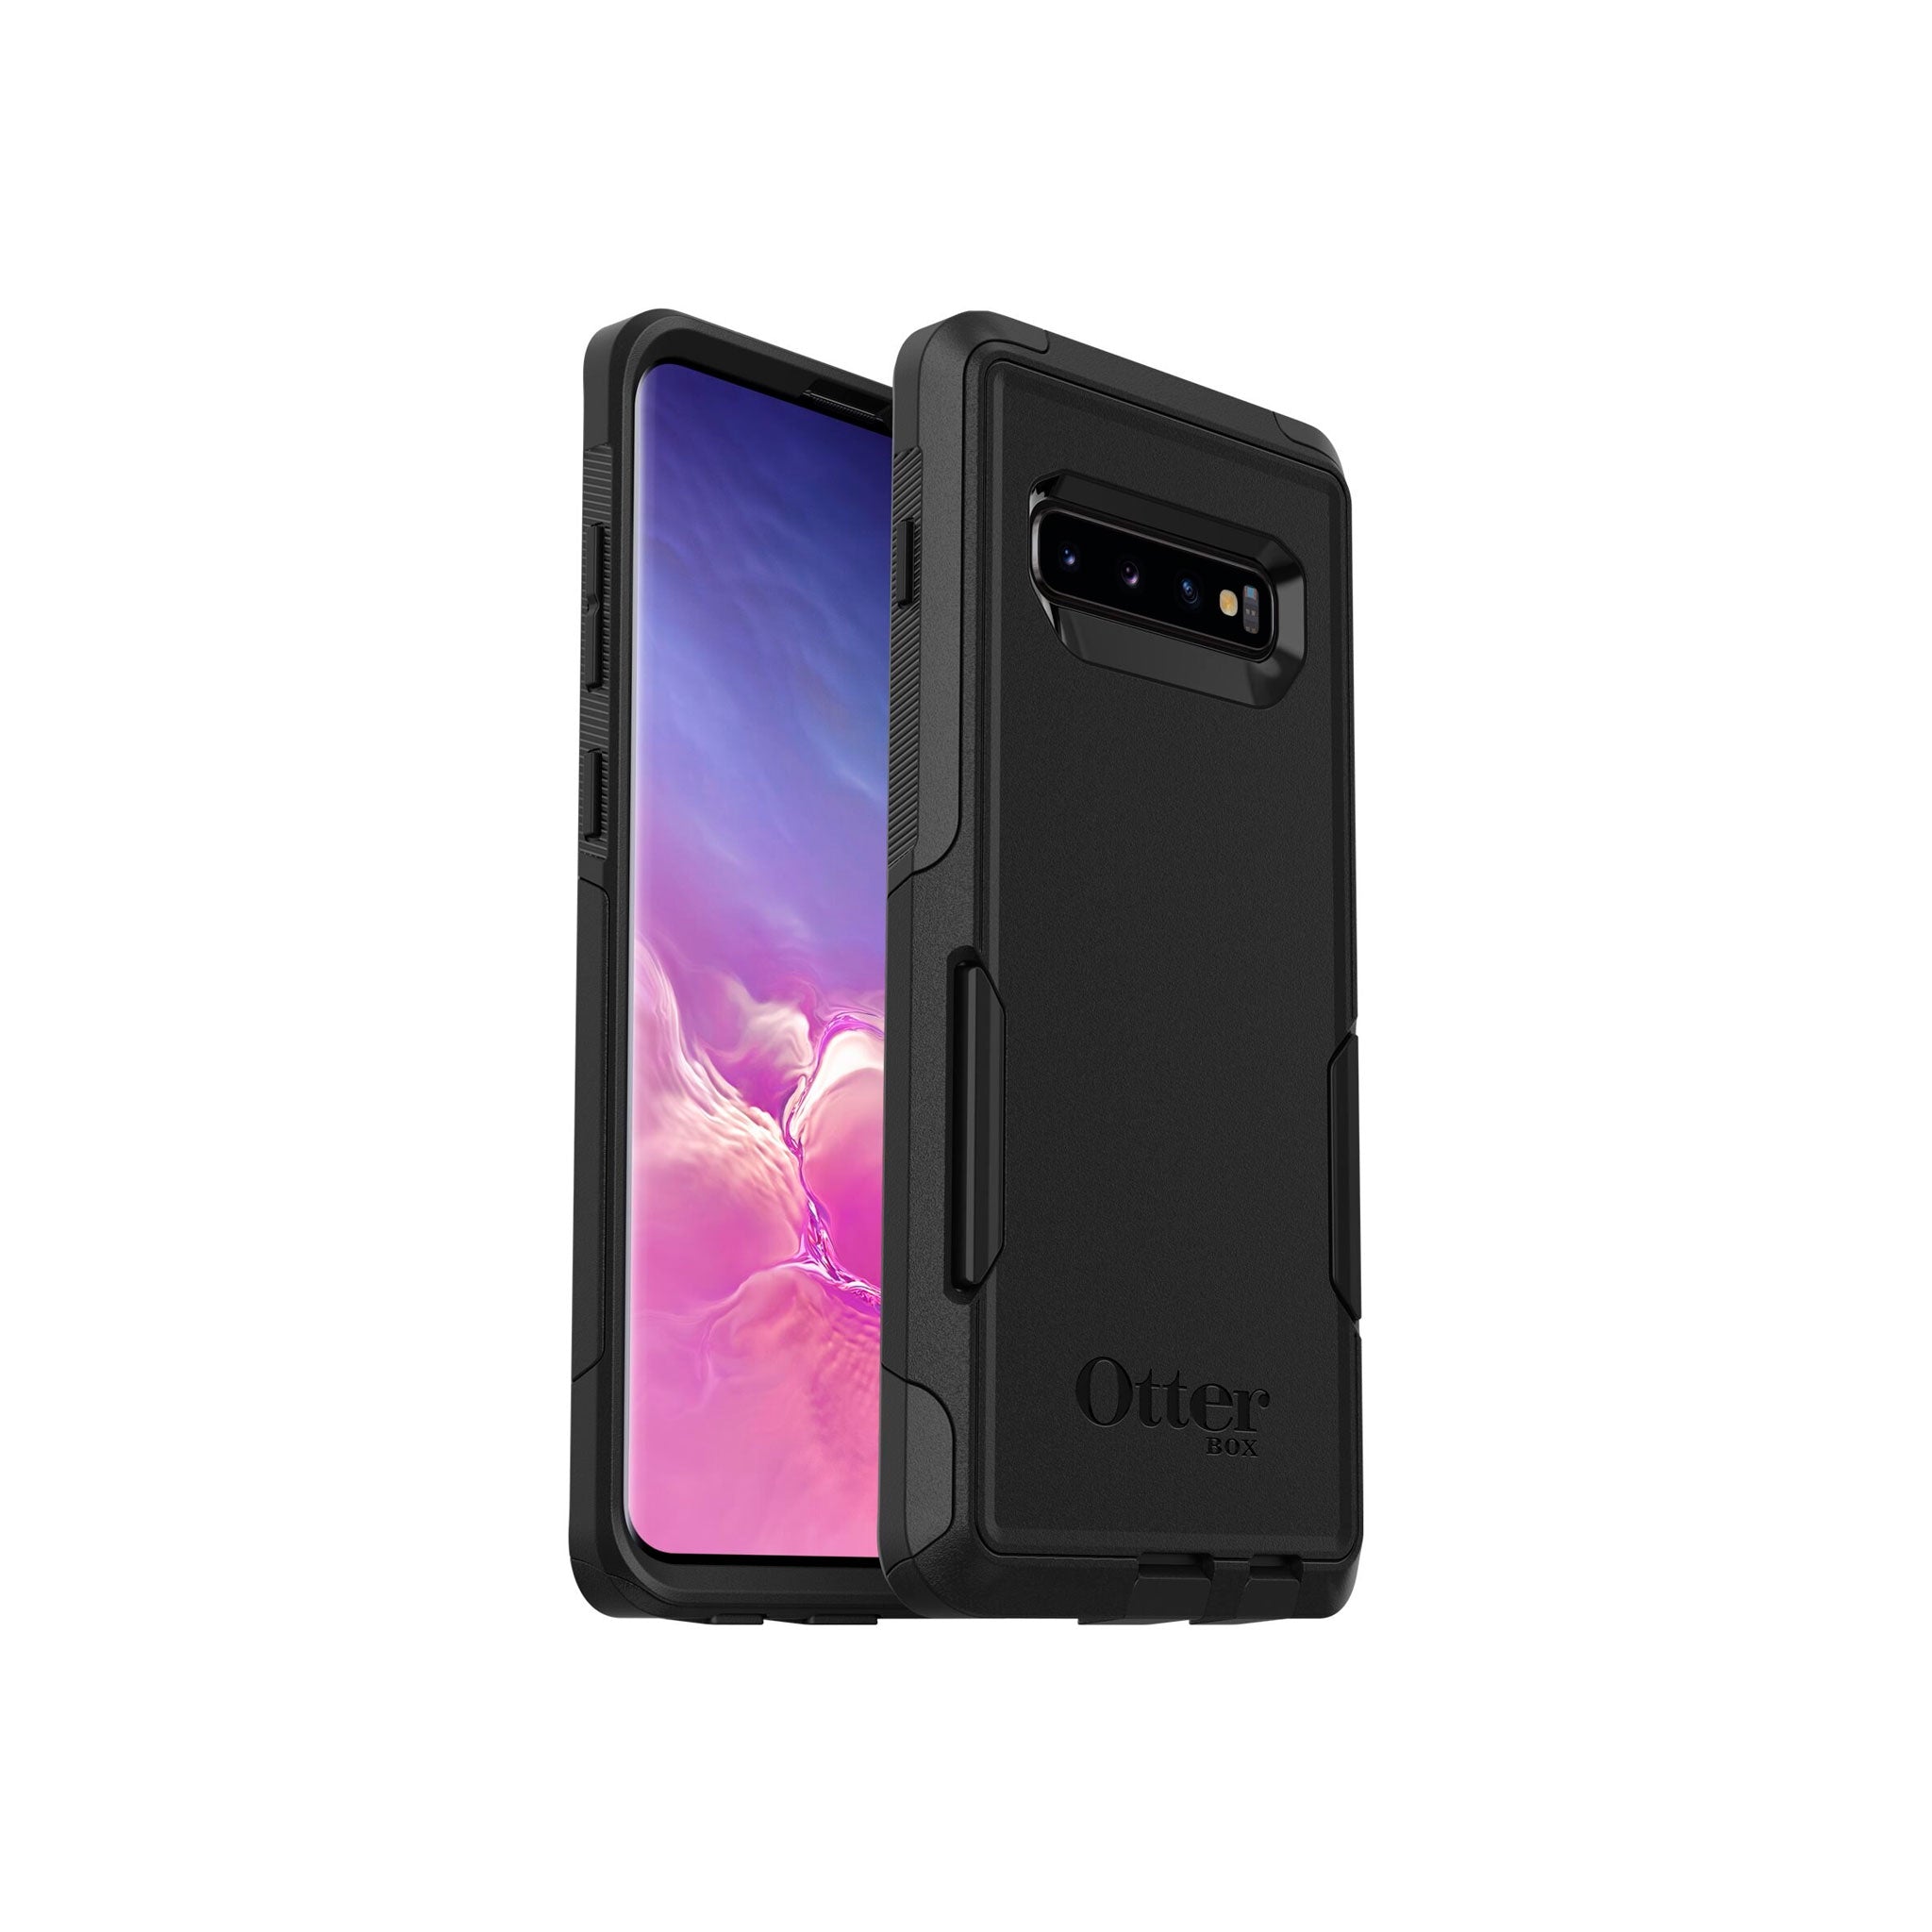 OtterBox - Samsung Commuter for Galaxy S10+ - Black